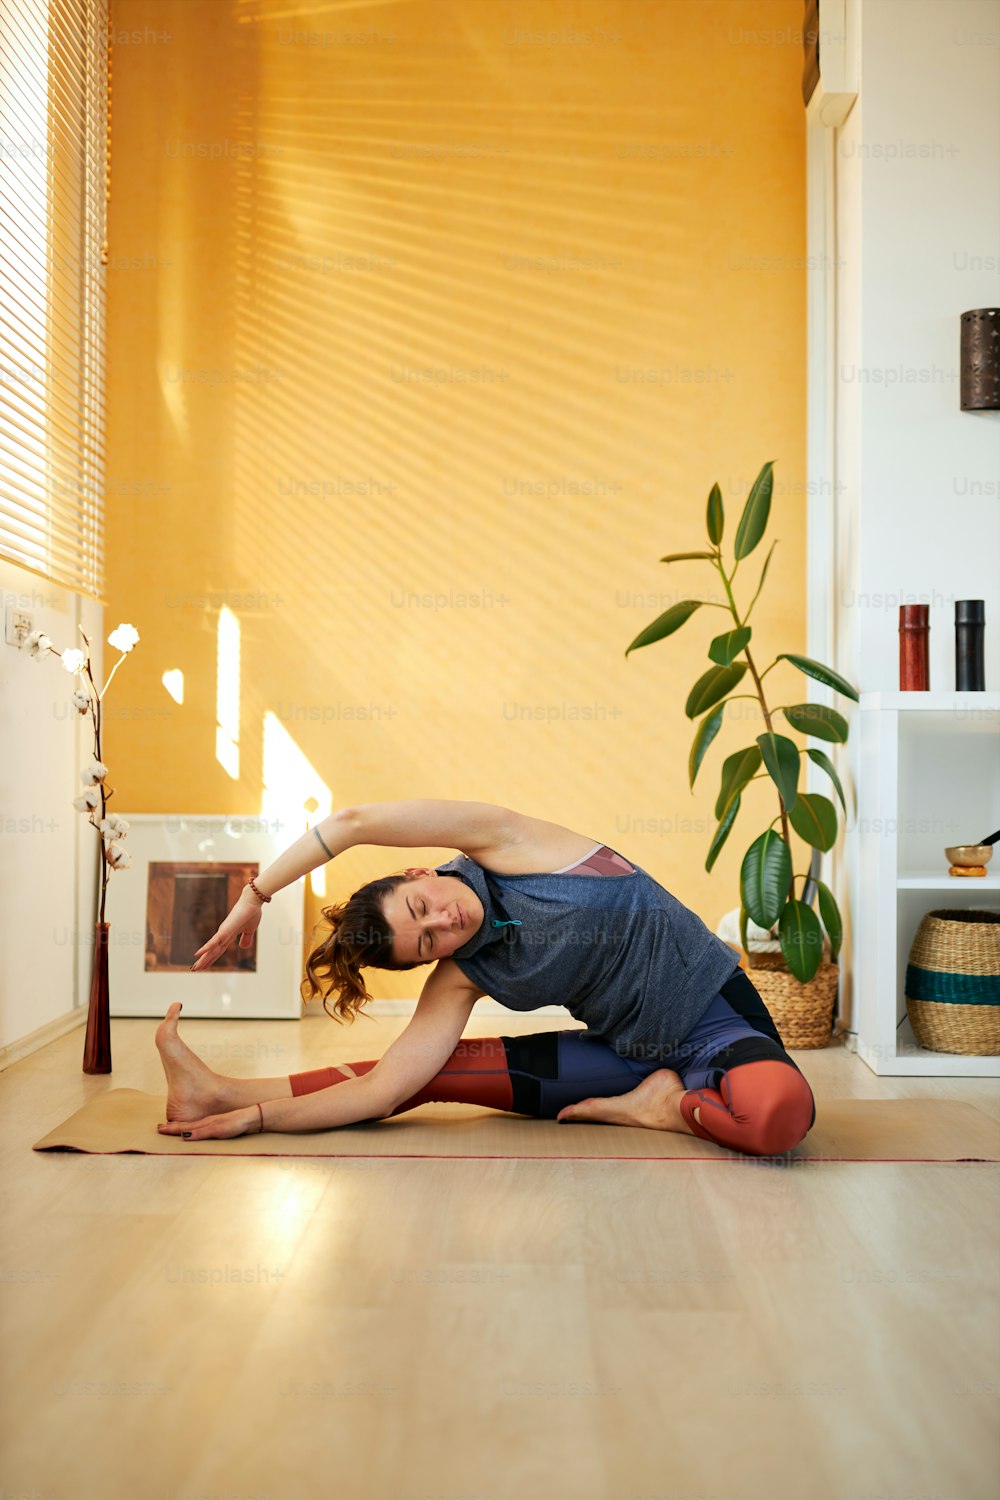 Attractive flexible Caucasian yoga brunette in Revolved Head to Knee yoga pose. Home interior, morning time.